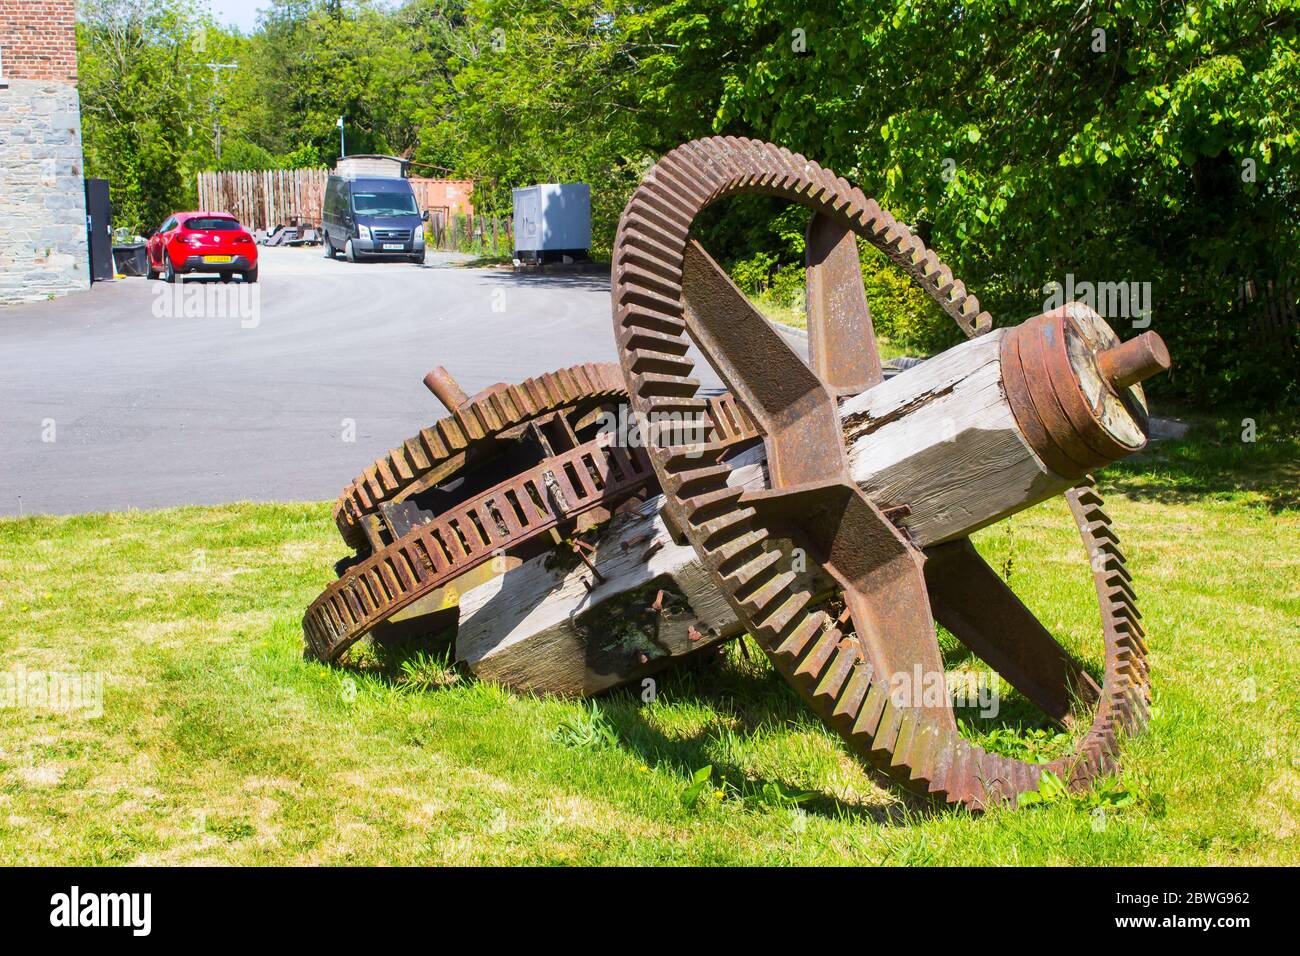 The ancient water wheel drive gear mechanism from the Ballydugan Flour Mill near Downpatrik County Down Northern ireland now used as garden ornaments. Stock Photo